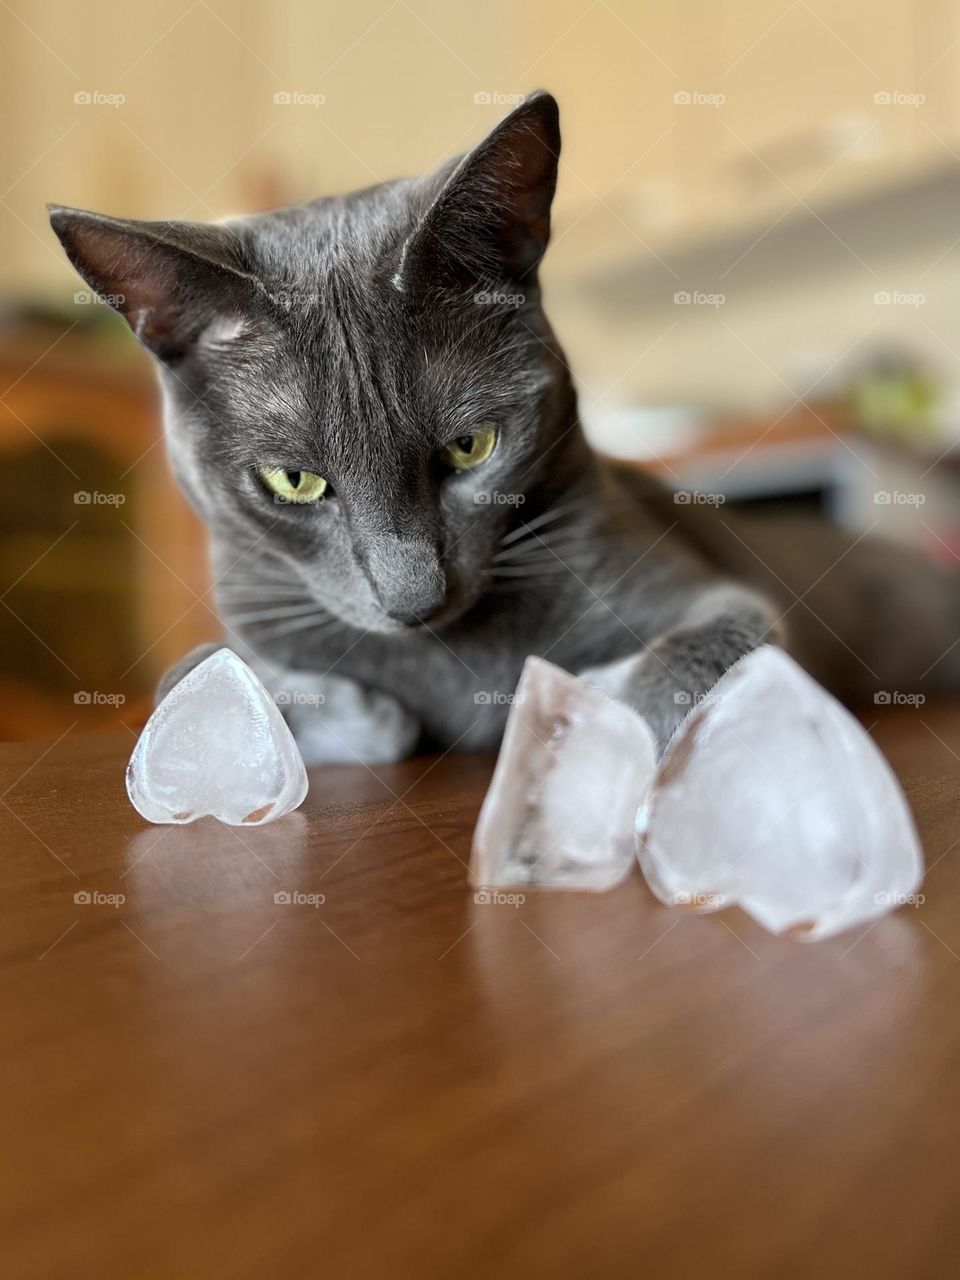 my cat likes ice cubes during the summer